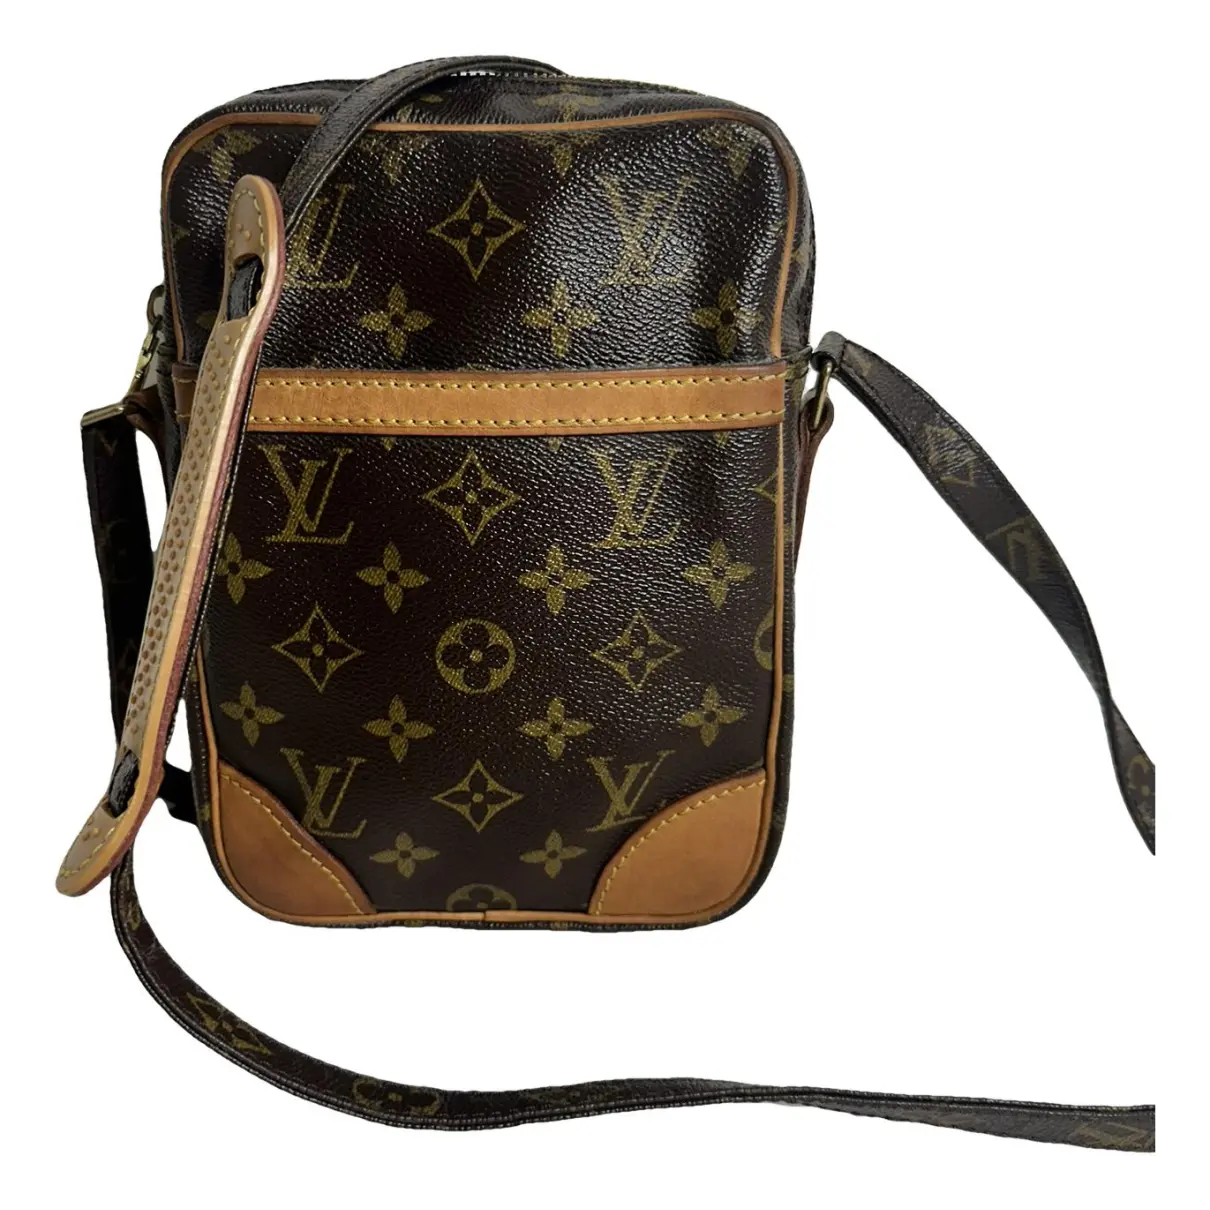 LOUIS VUITTON Brown Patent Leather Monogram And Iridescent Reflection Bag